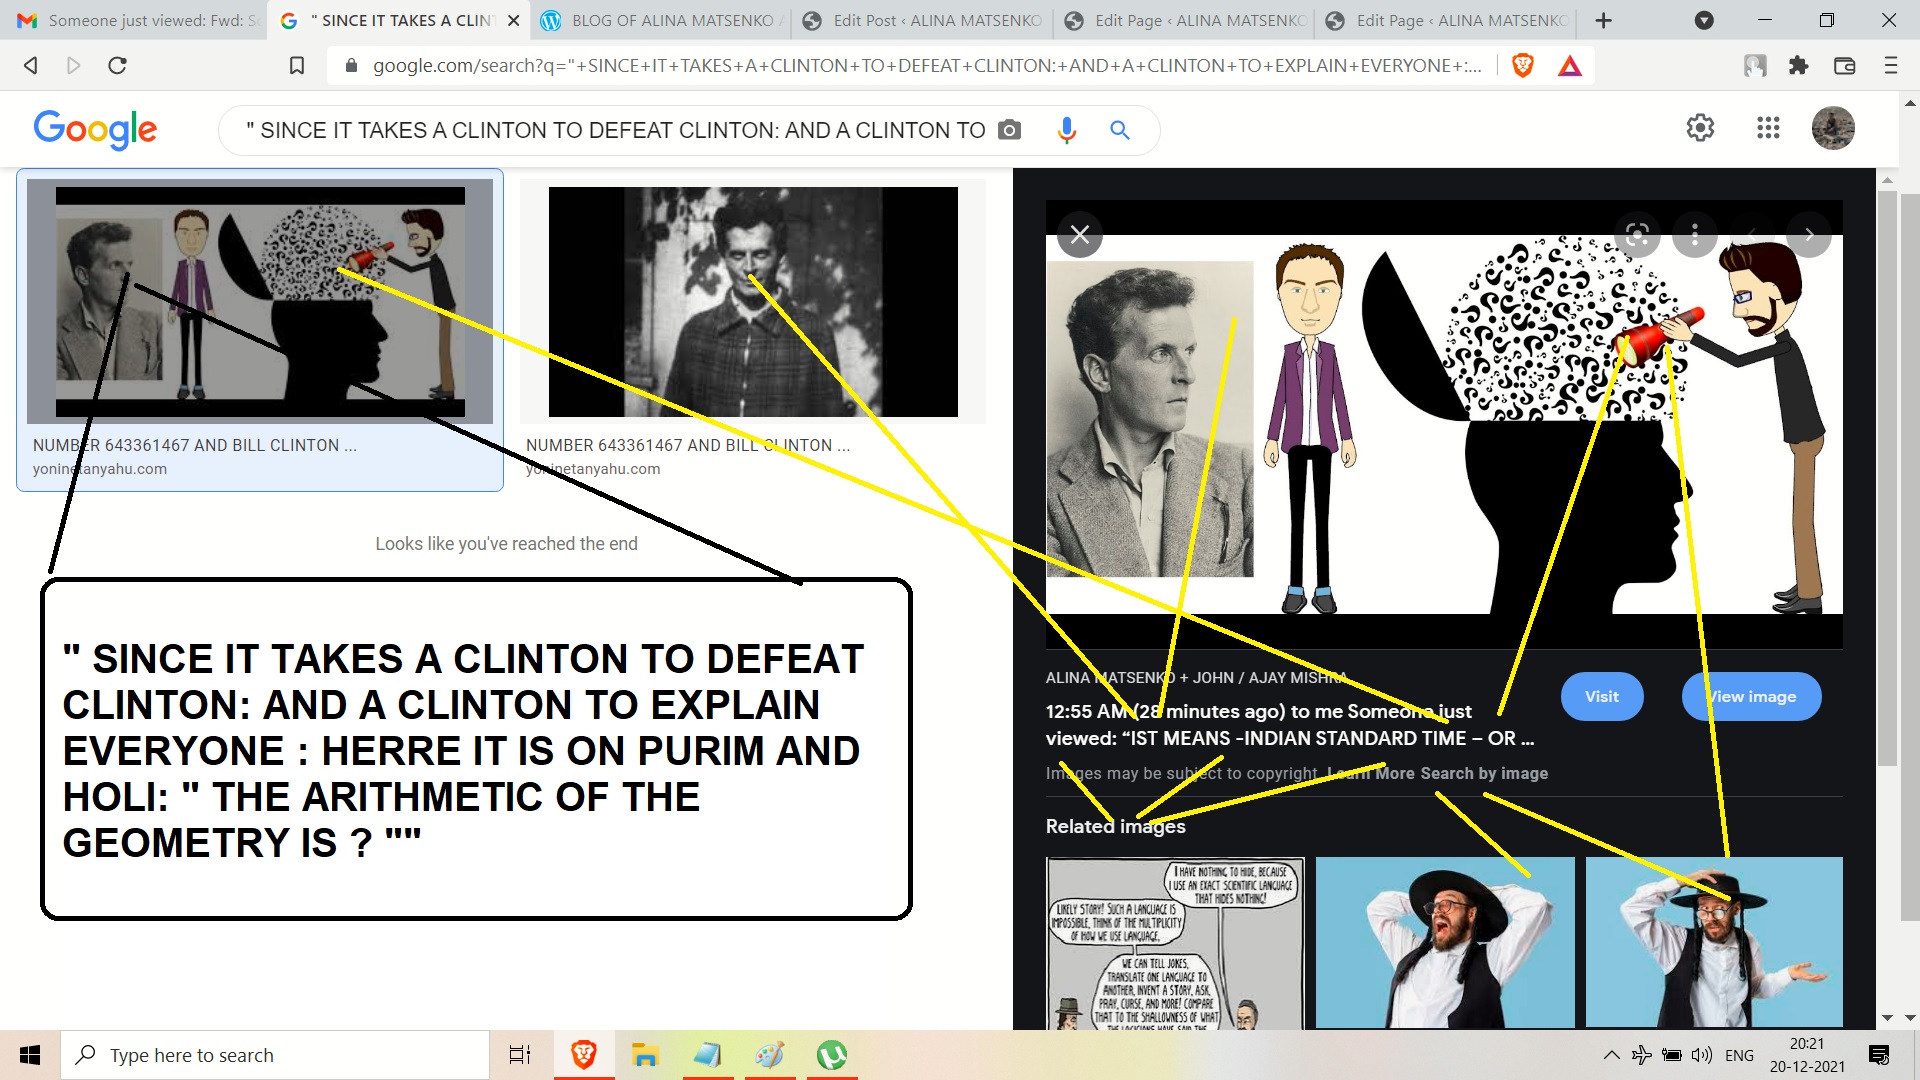 SINCE IT TAKES A CLINTON TO DEFEAT CLINTON: AND A CLINTON TO EXPLAIN EVERYONE HERRE IT IS ON PURIM AND HOLI THE ARITHMETIC OF THE GEOMETRY IS